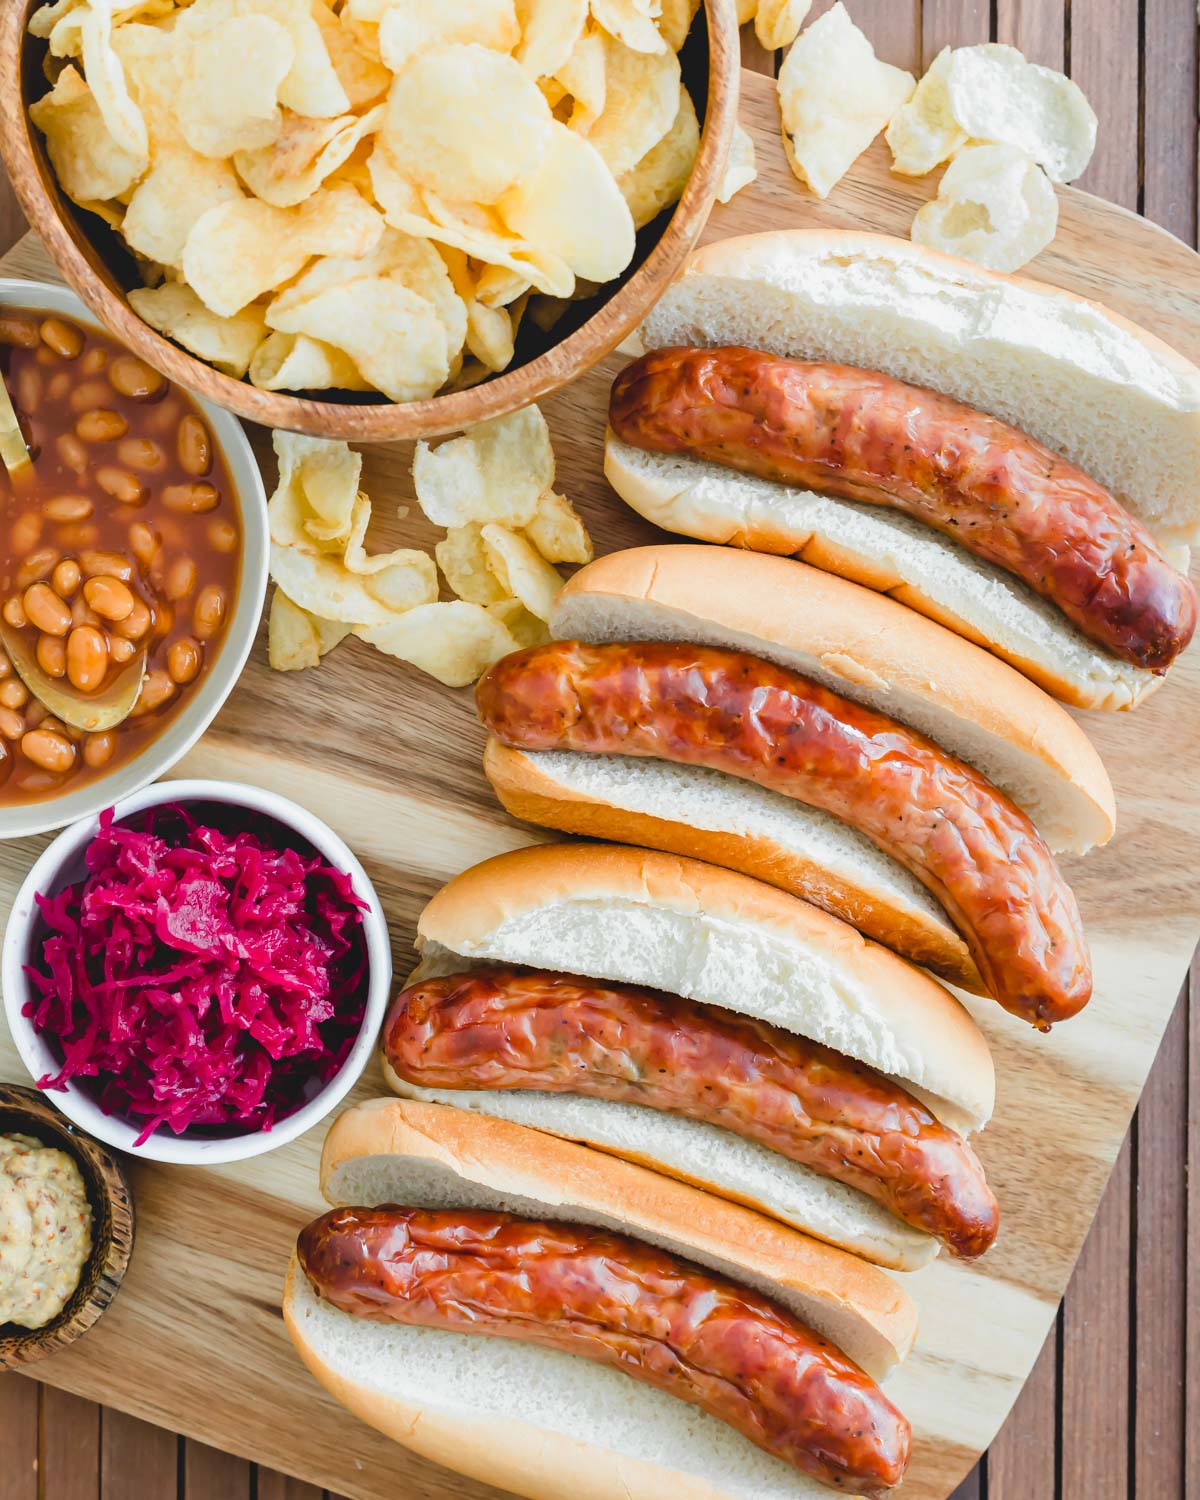 Juicy bratwurst cooked to perfection in an air fryer served with buns, fries, baked beans and sauerkraut.